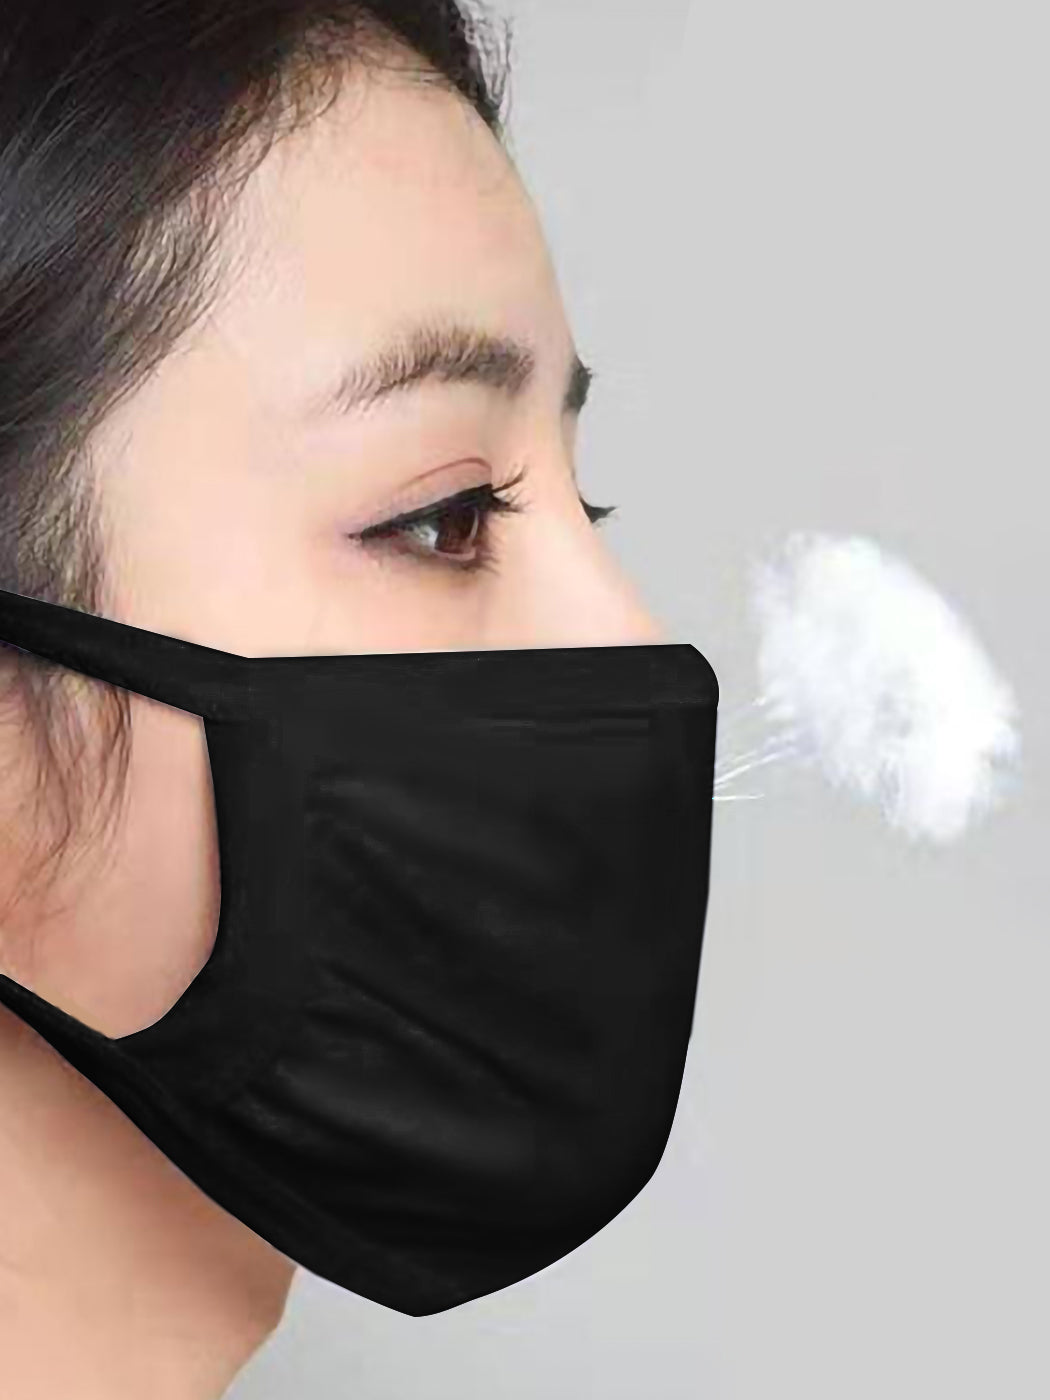 Unisex Cotton Mouth Face Cover Anti Dust Breathable Washable Reusable Outdoor Face Cover